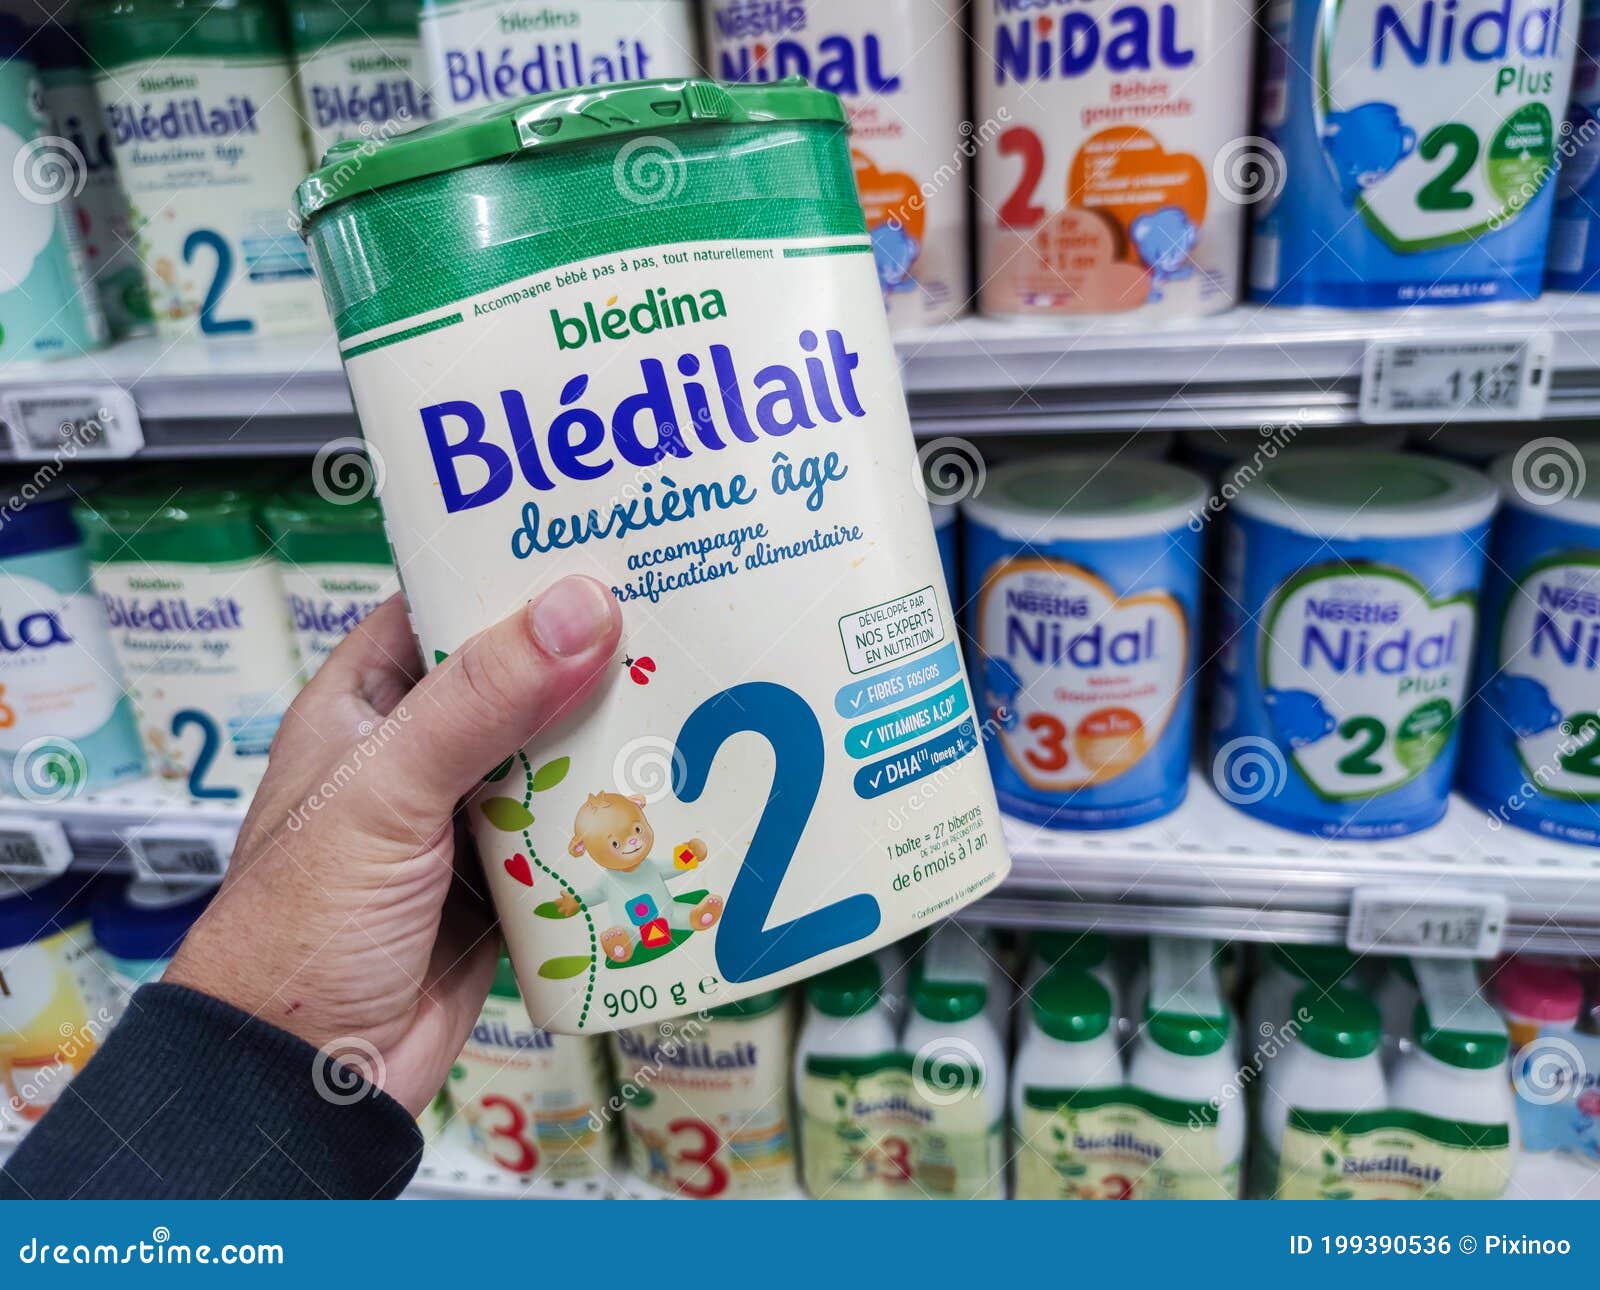 A Consumer Chooses a Box of Bledilait Brand Baby Milk from the